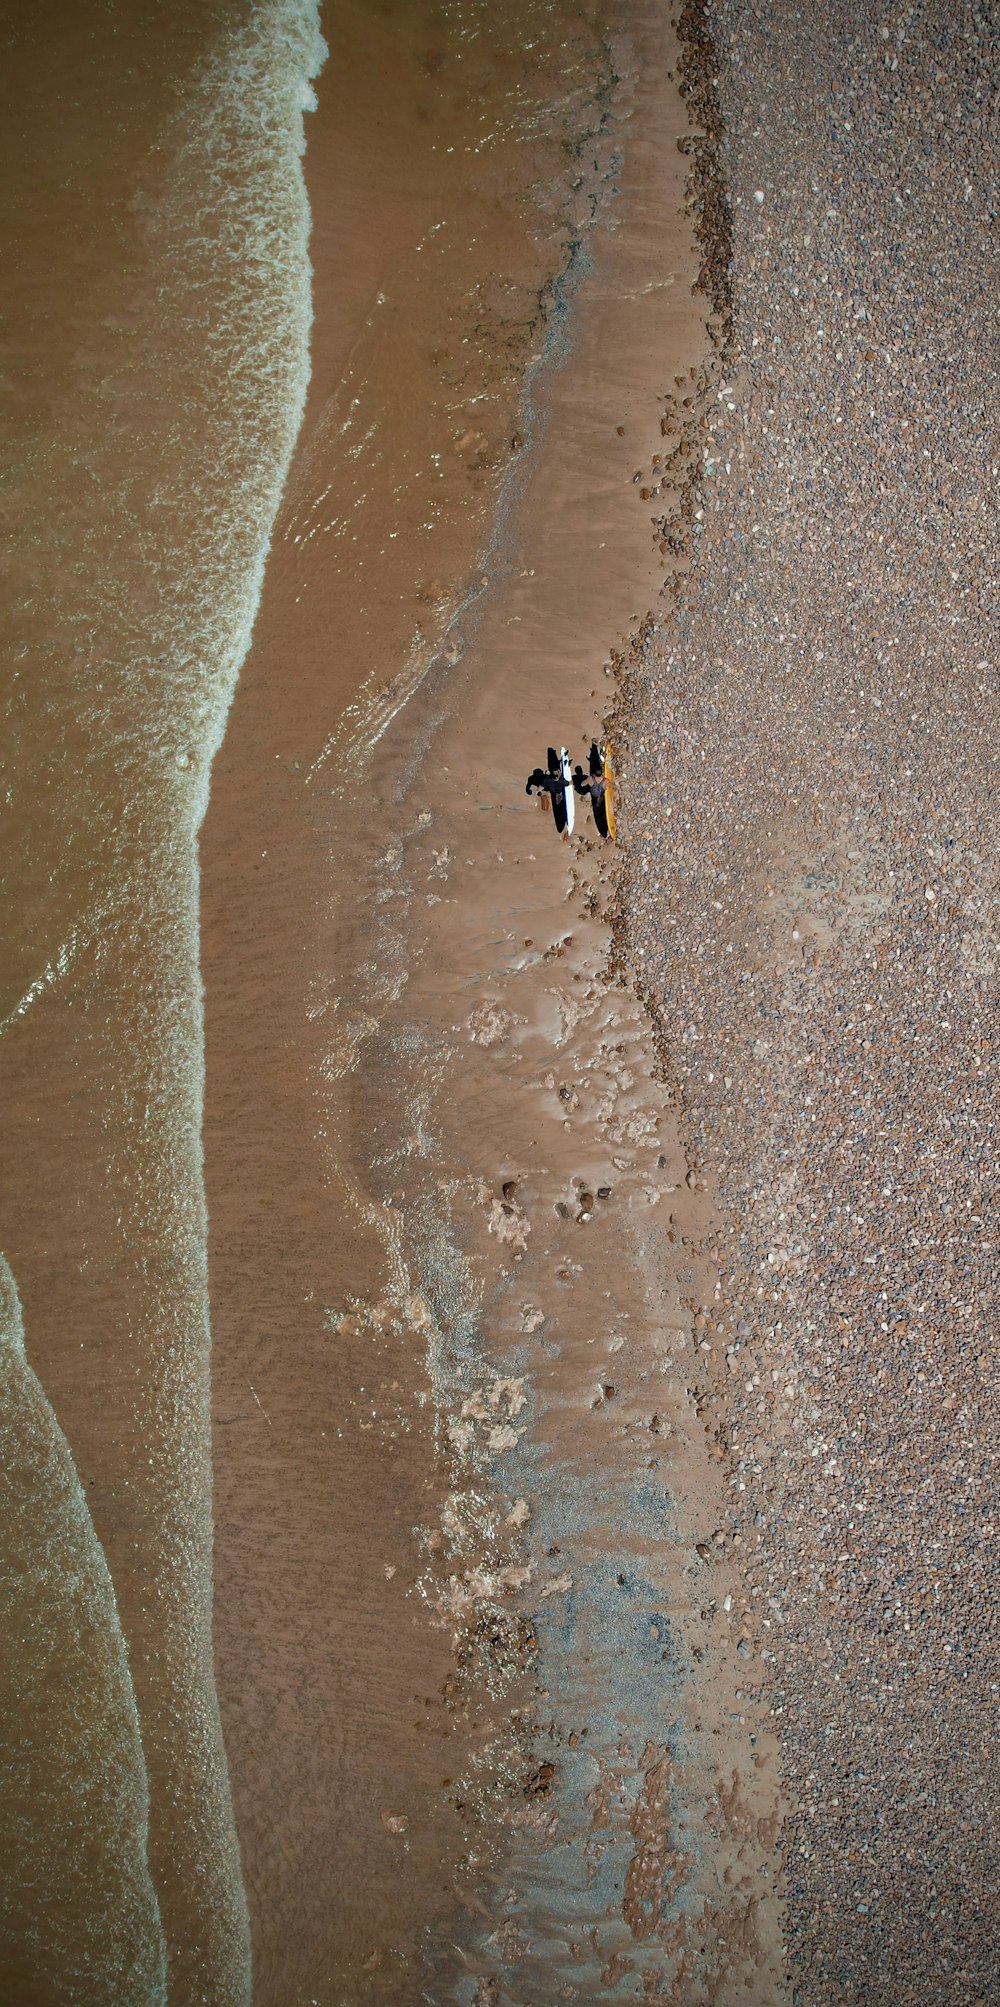 a couple of people walking along a beach next to the ocean